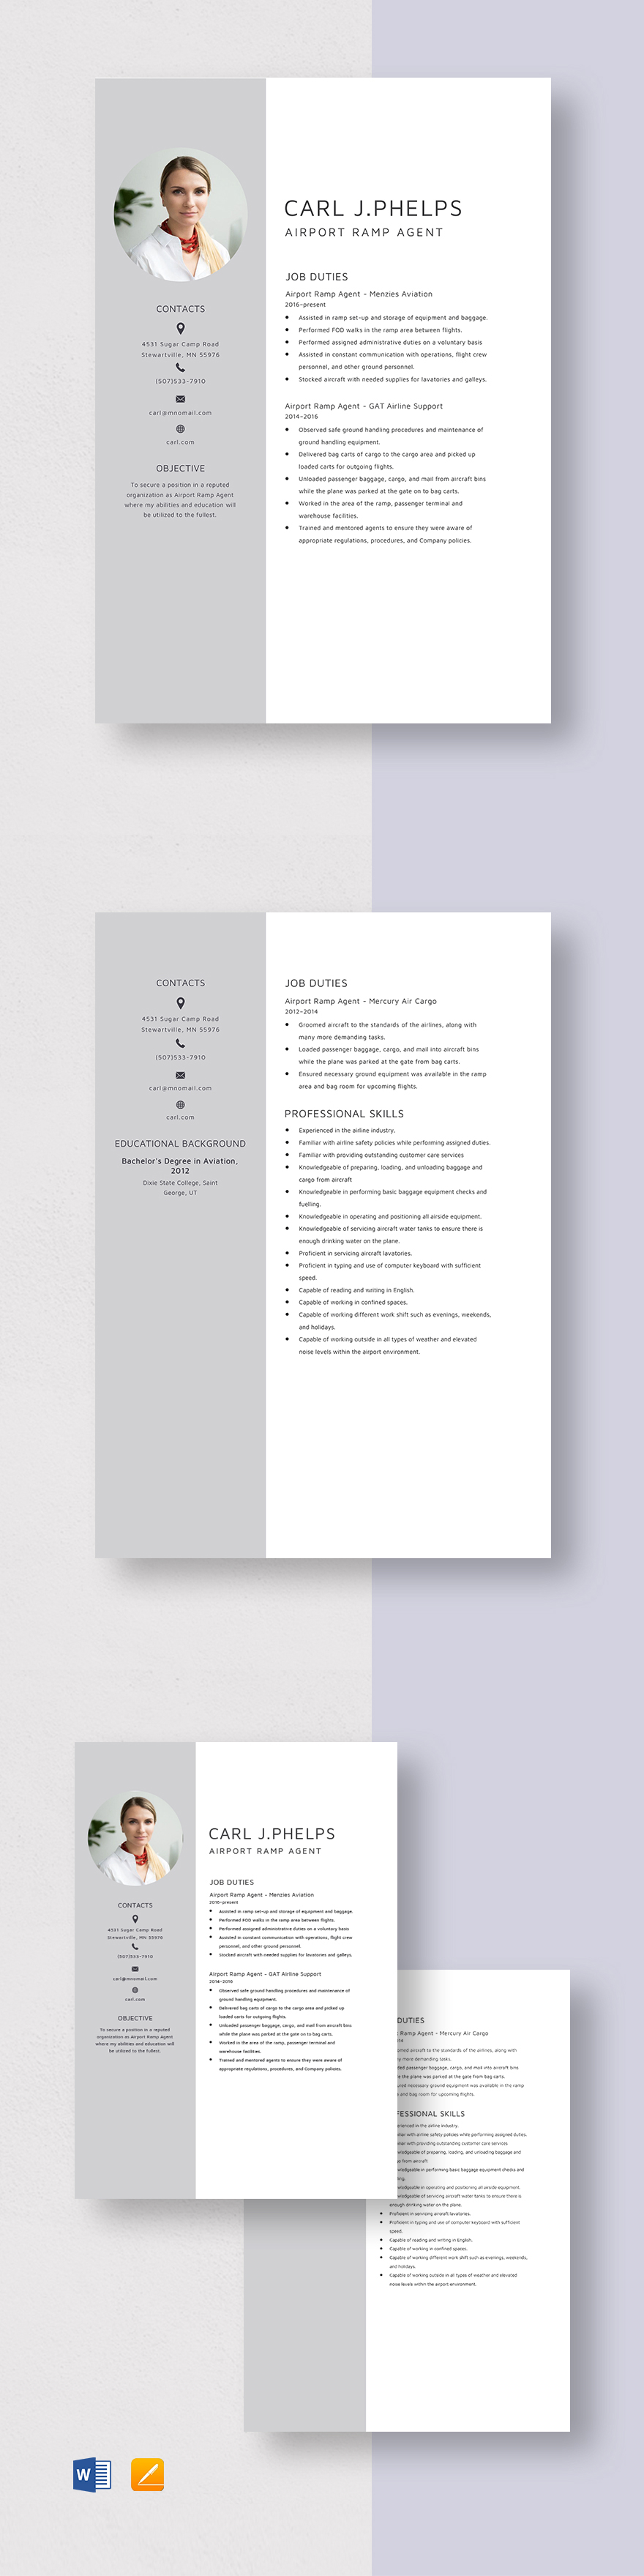 Free Airport Ramp Agent Resume Template